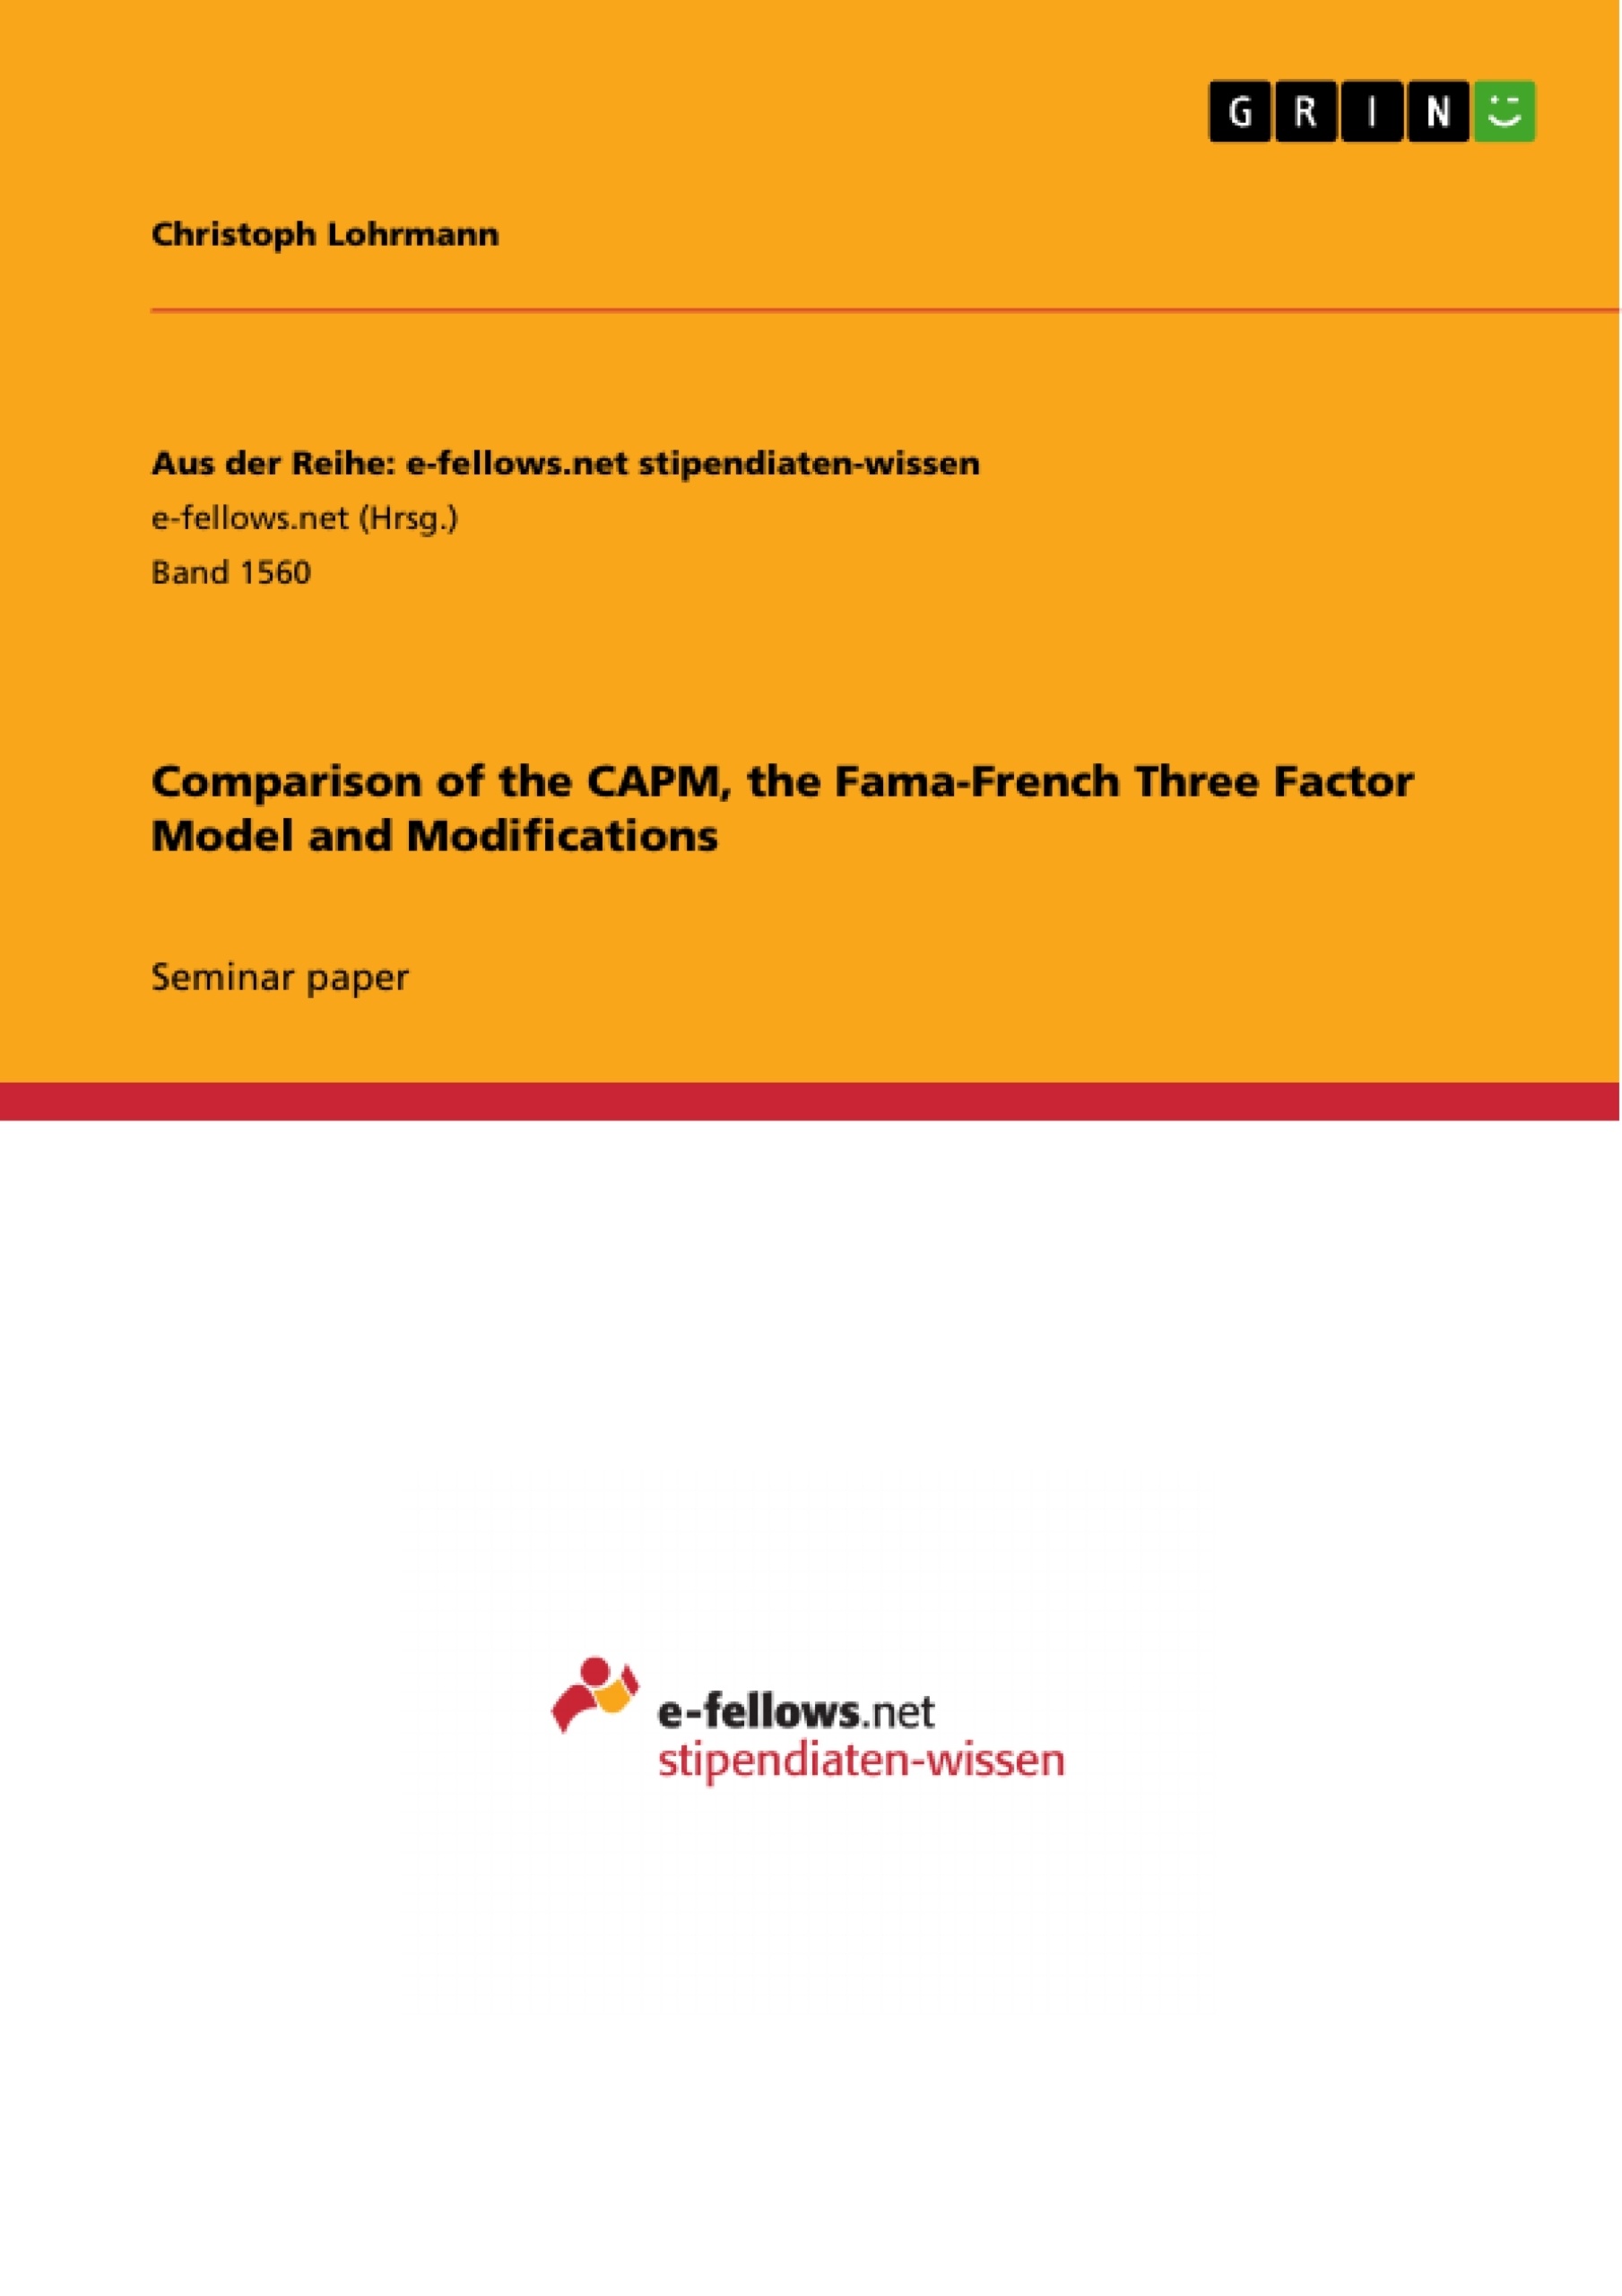 Título: Comparison of the CAPM, the Fama-French Three Factor Model and Modifications